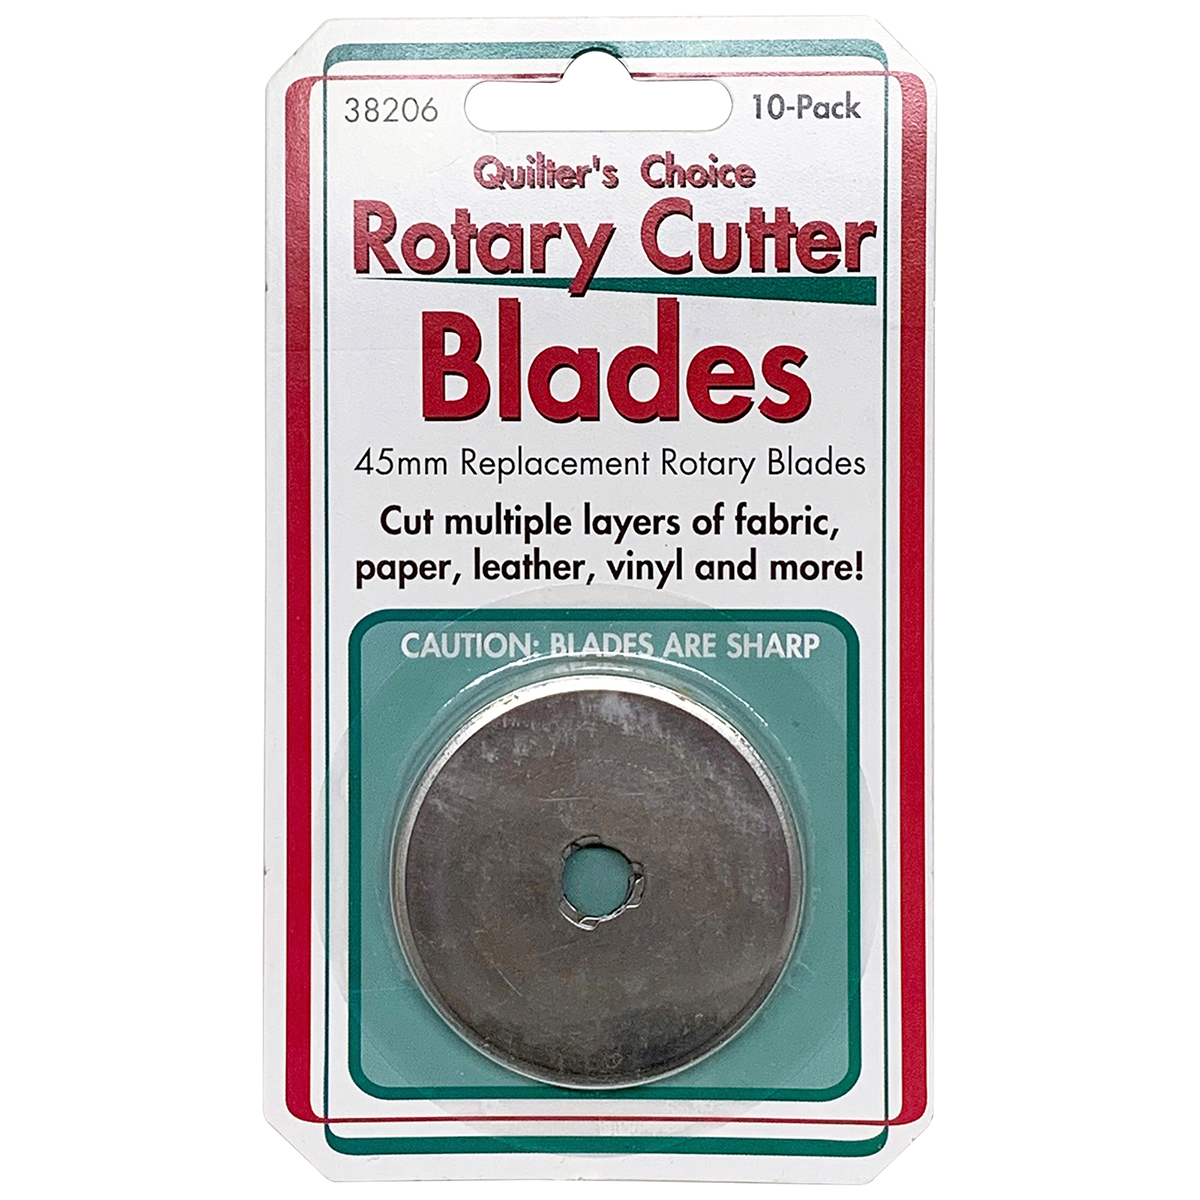 Take advantage of huge savings on 60 mm Rotary Cutter Blades 1 Pack RNK  Distributing . Shop for the best items at great prices and excellent service